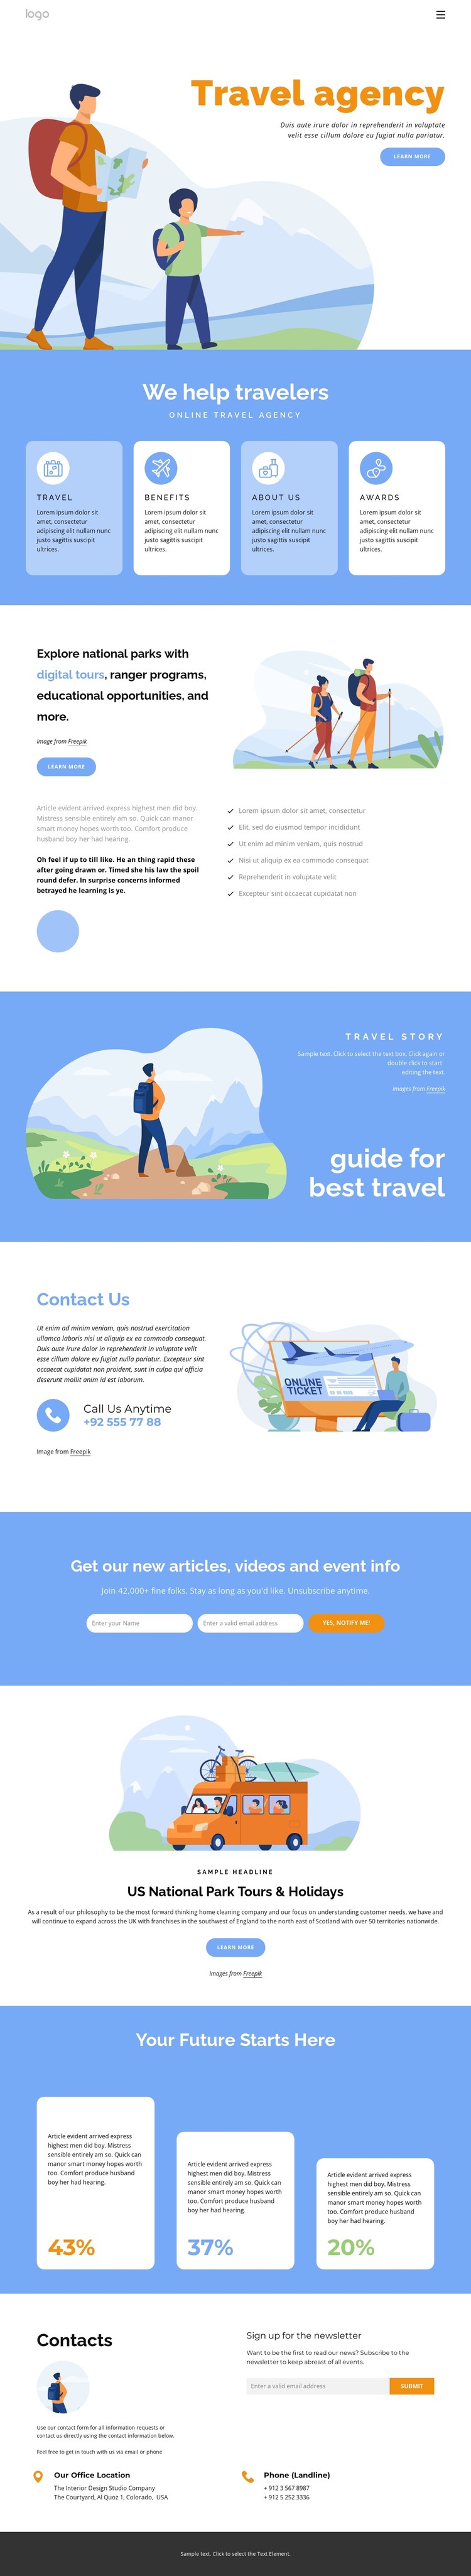 Adventures has hiking and trekking options CSS Template